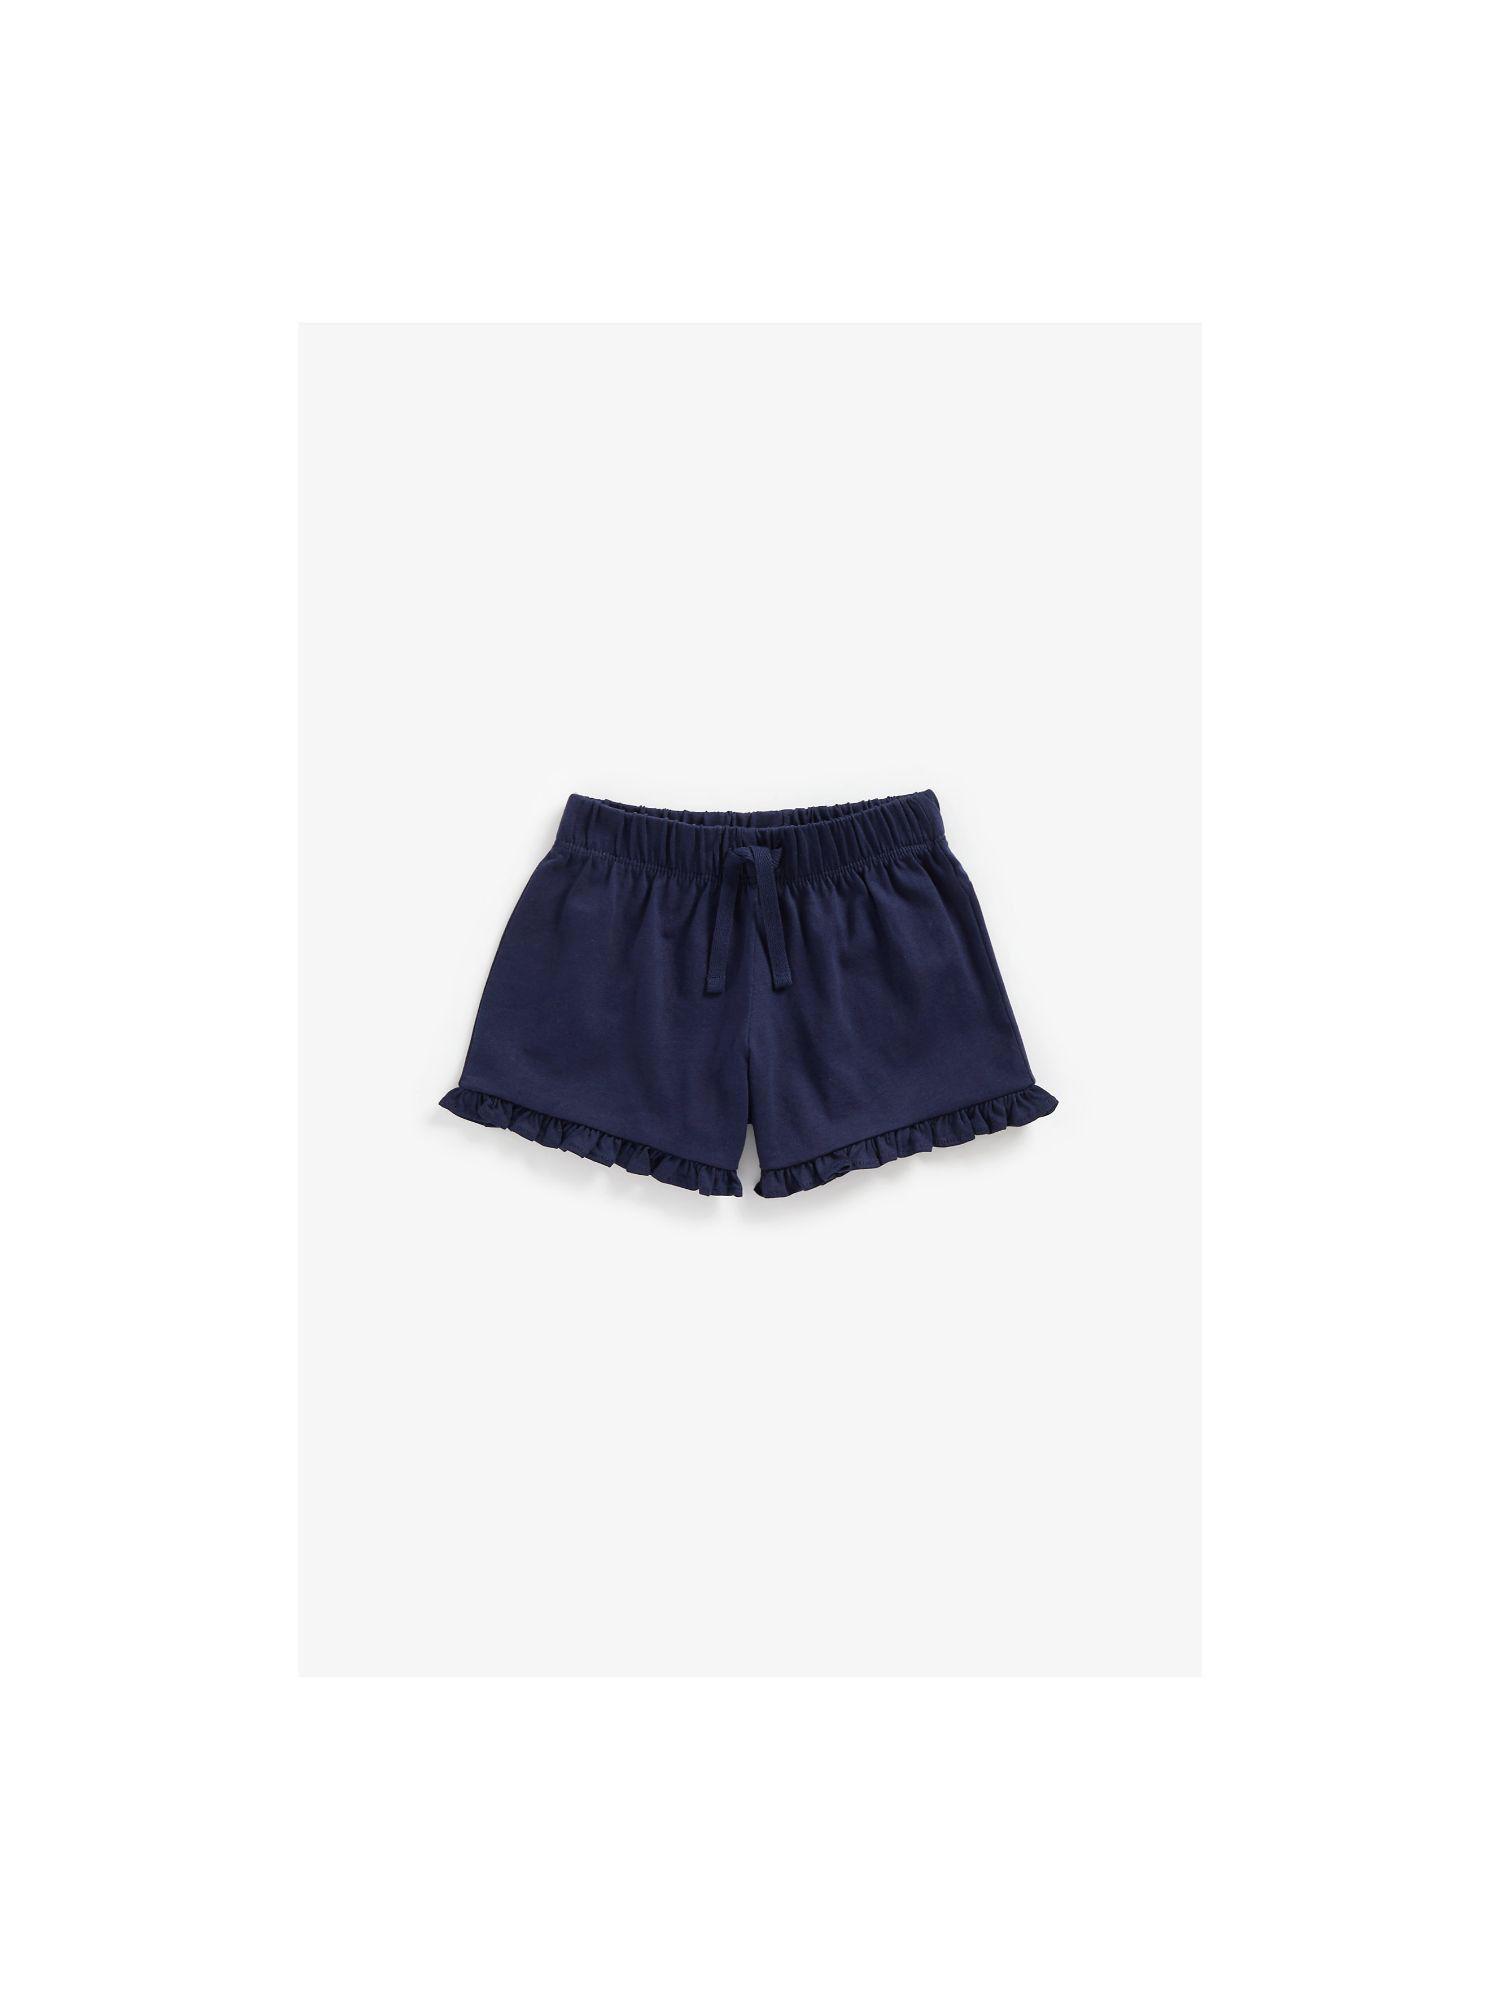 mother care baby girls shorts & skirts